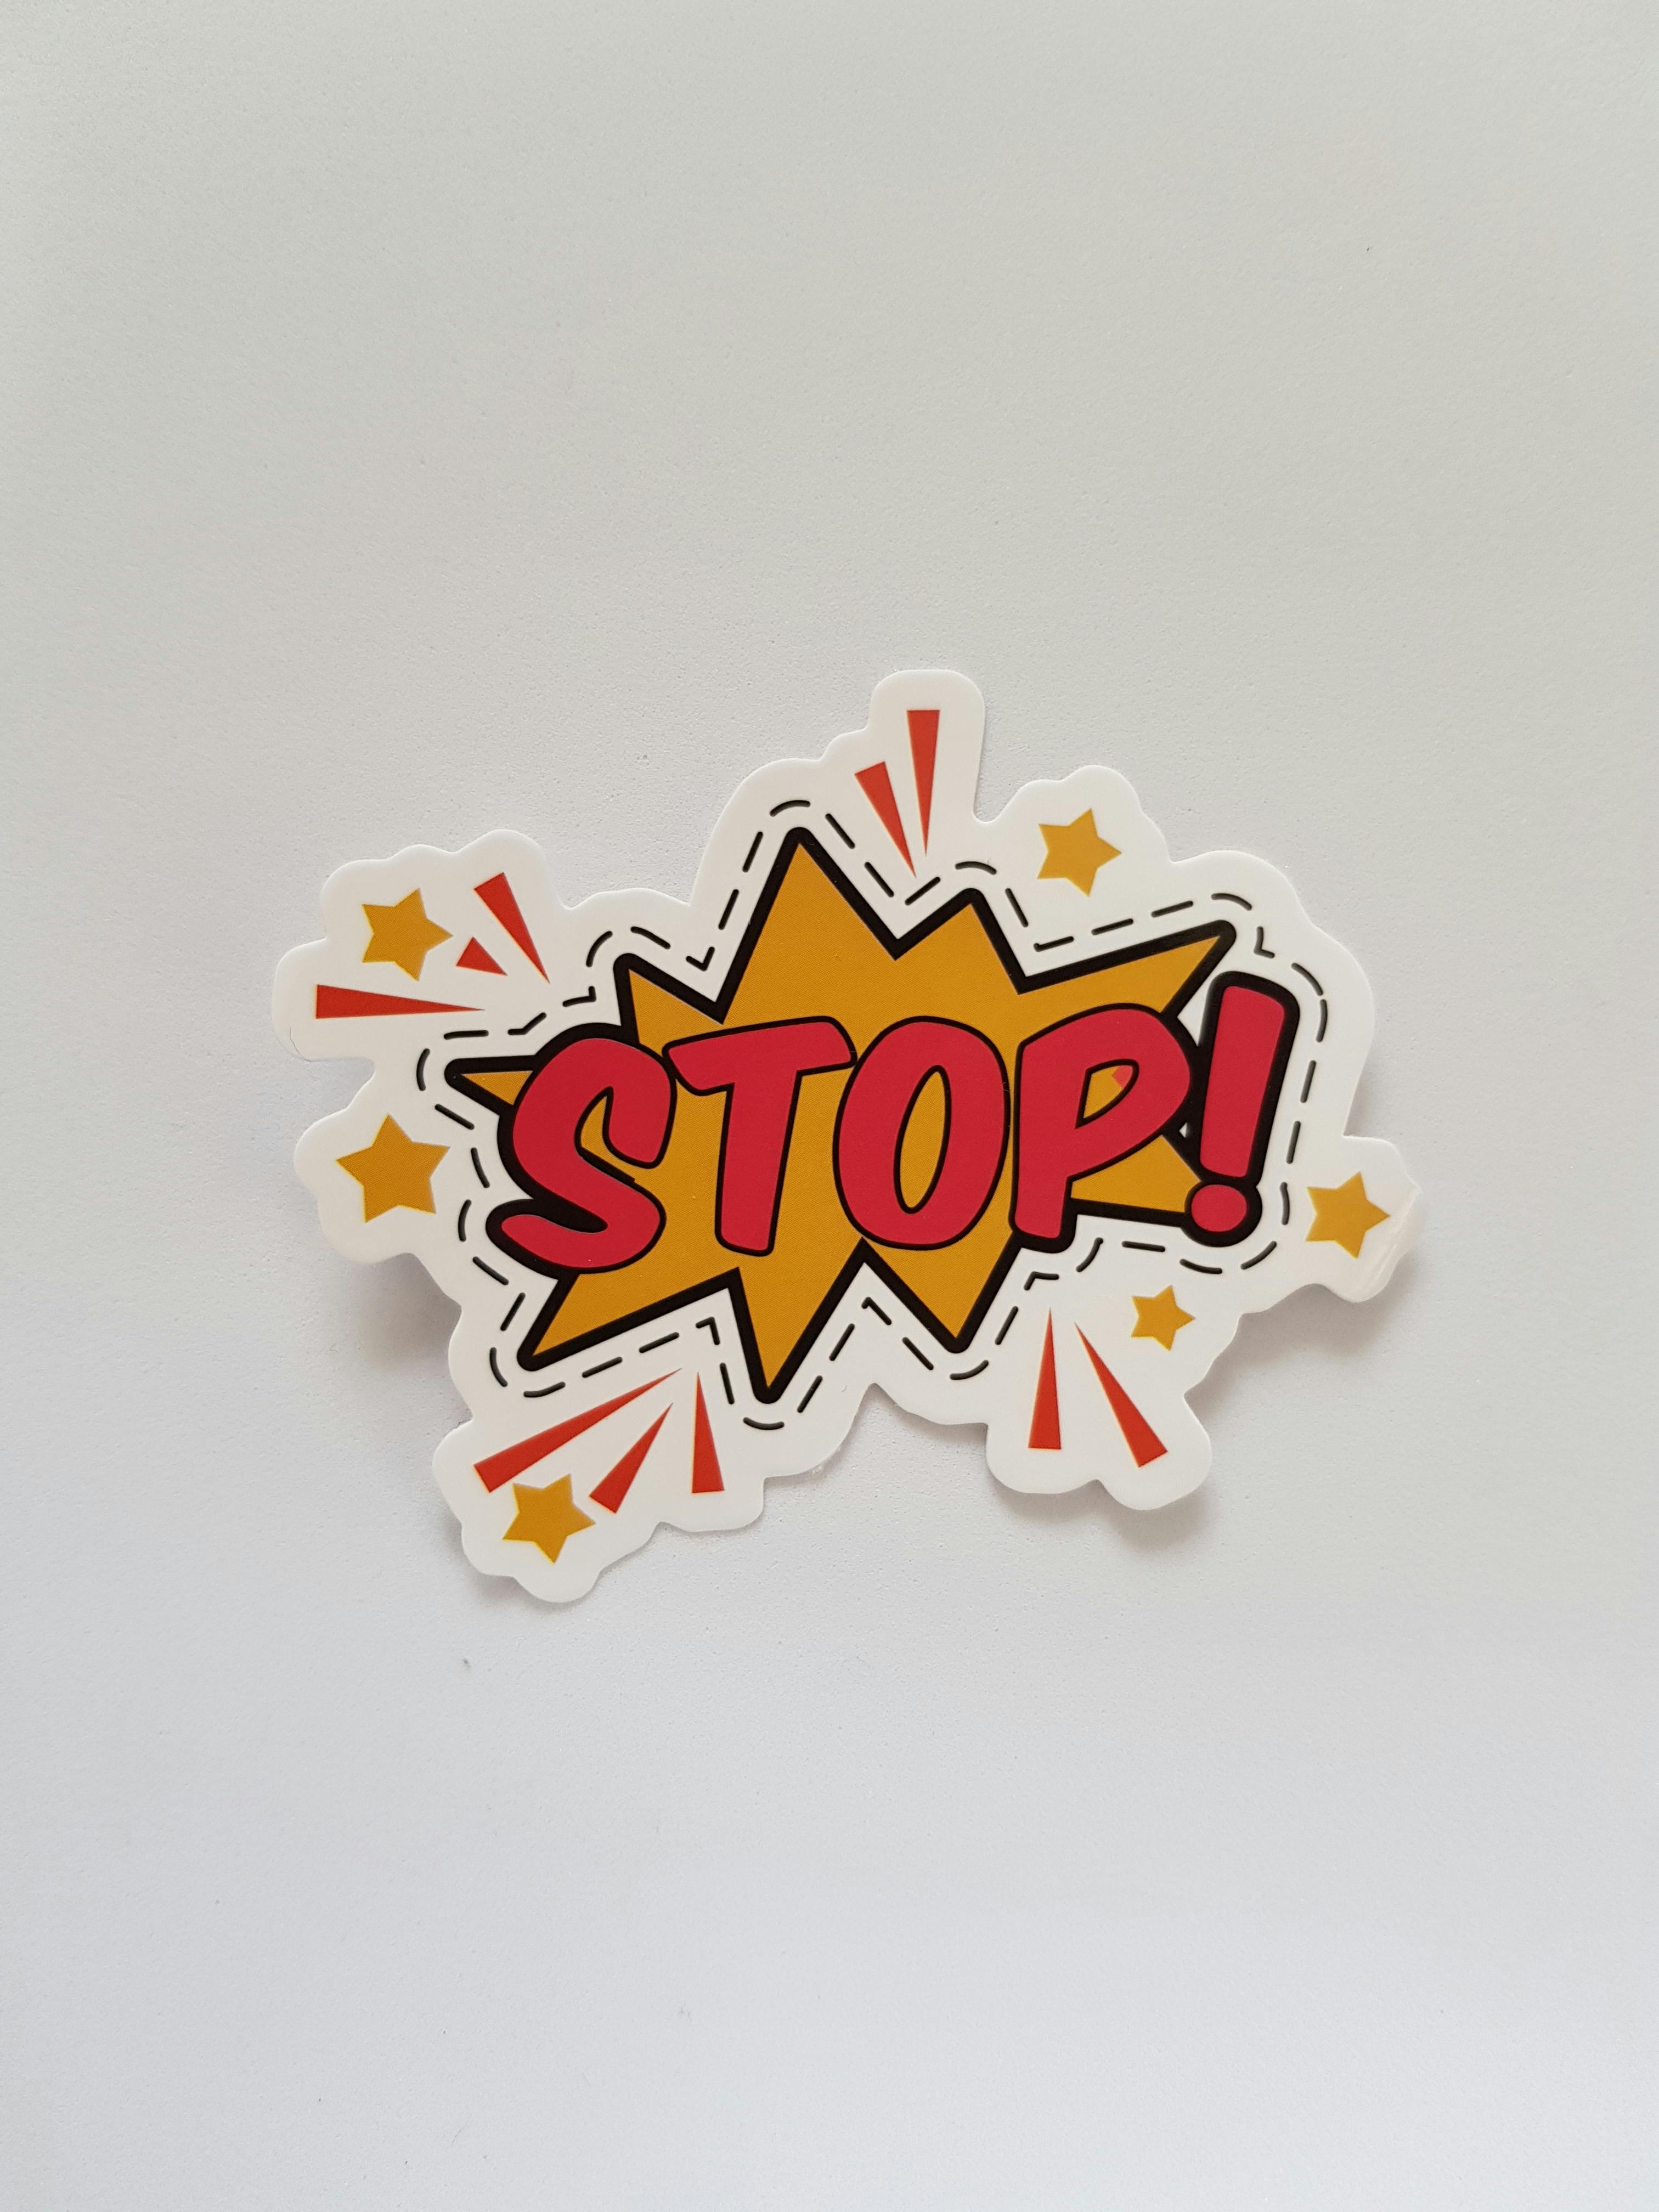 Free stock photo of stop, stop sign, stop stiker